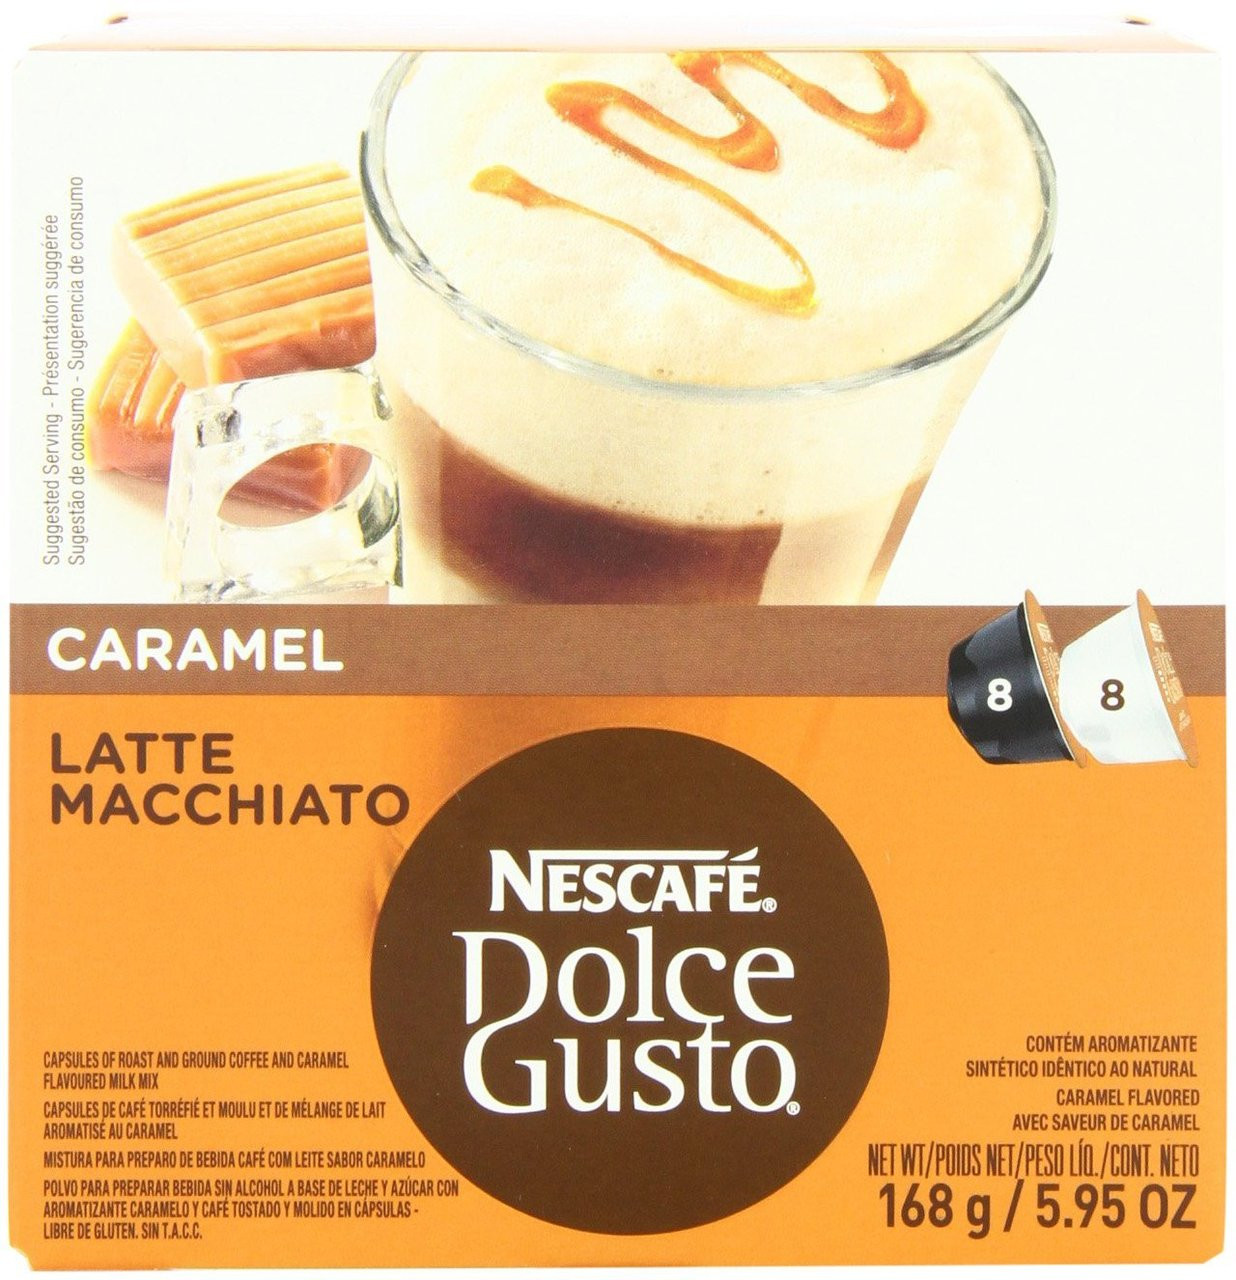 Nescafe Dolce Gusto For Nescafe Dolce Gusto Brewers Caramel Latte Macchiato 16 Count Pack Of 3 For Moms